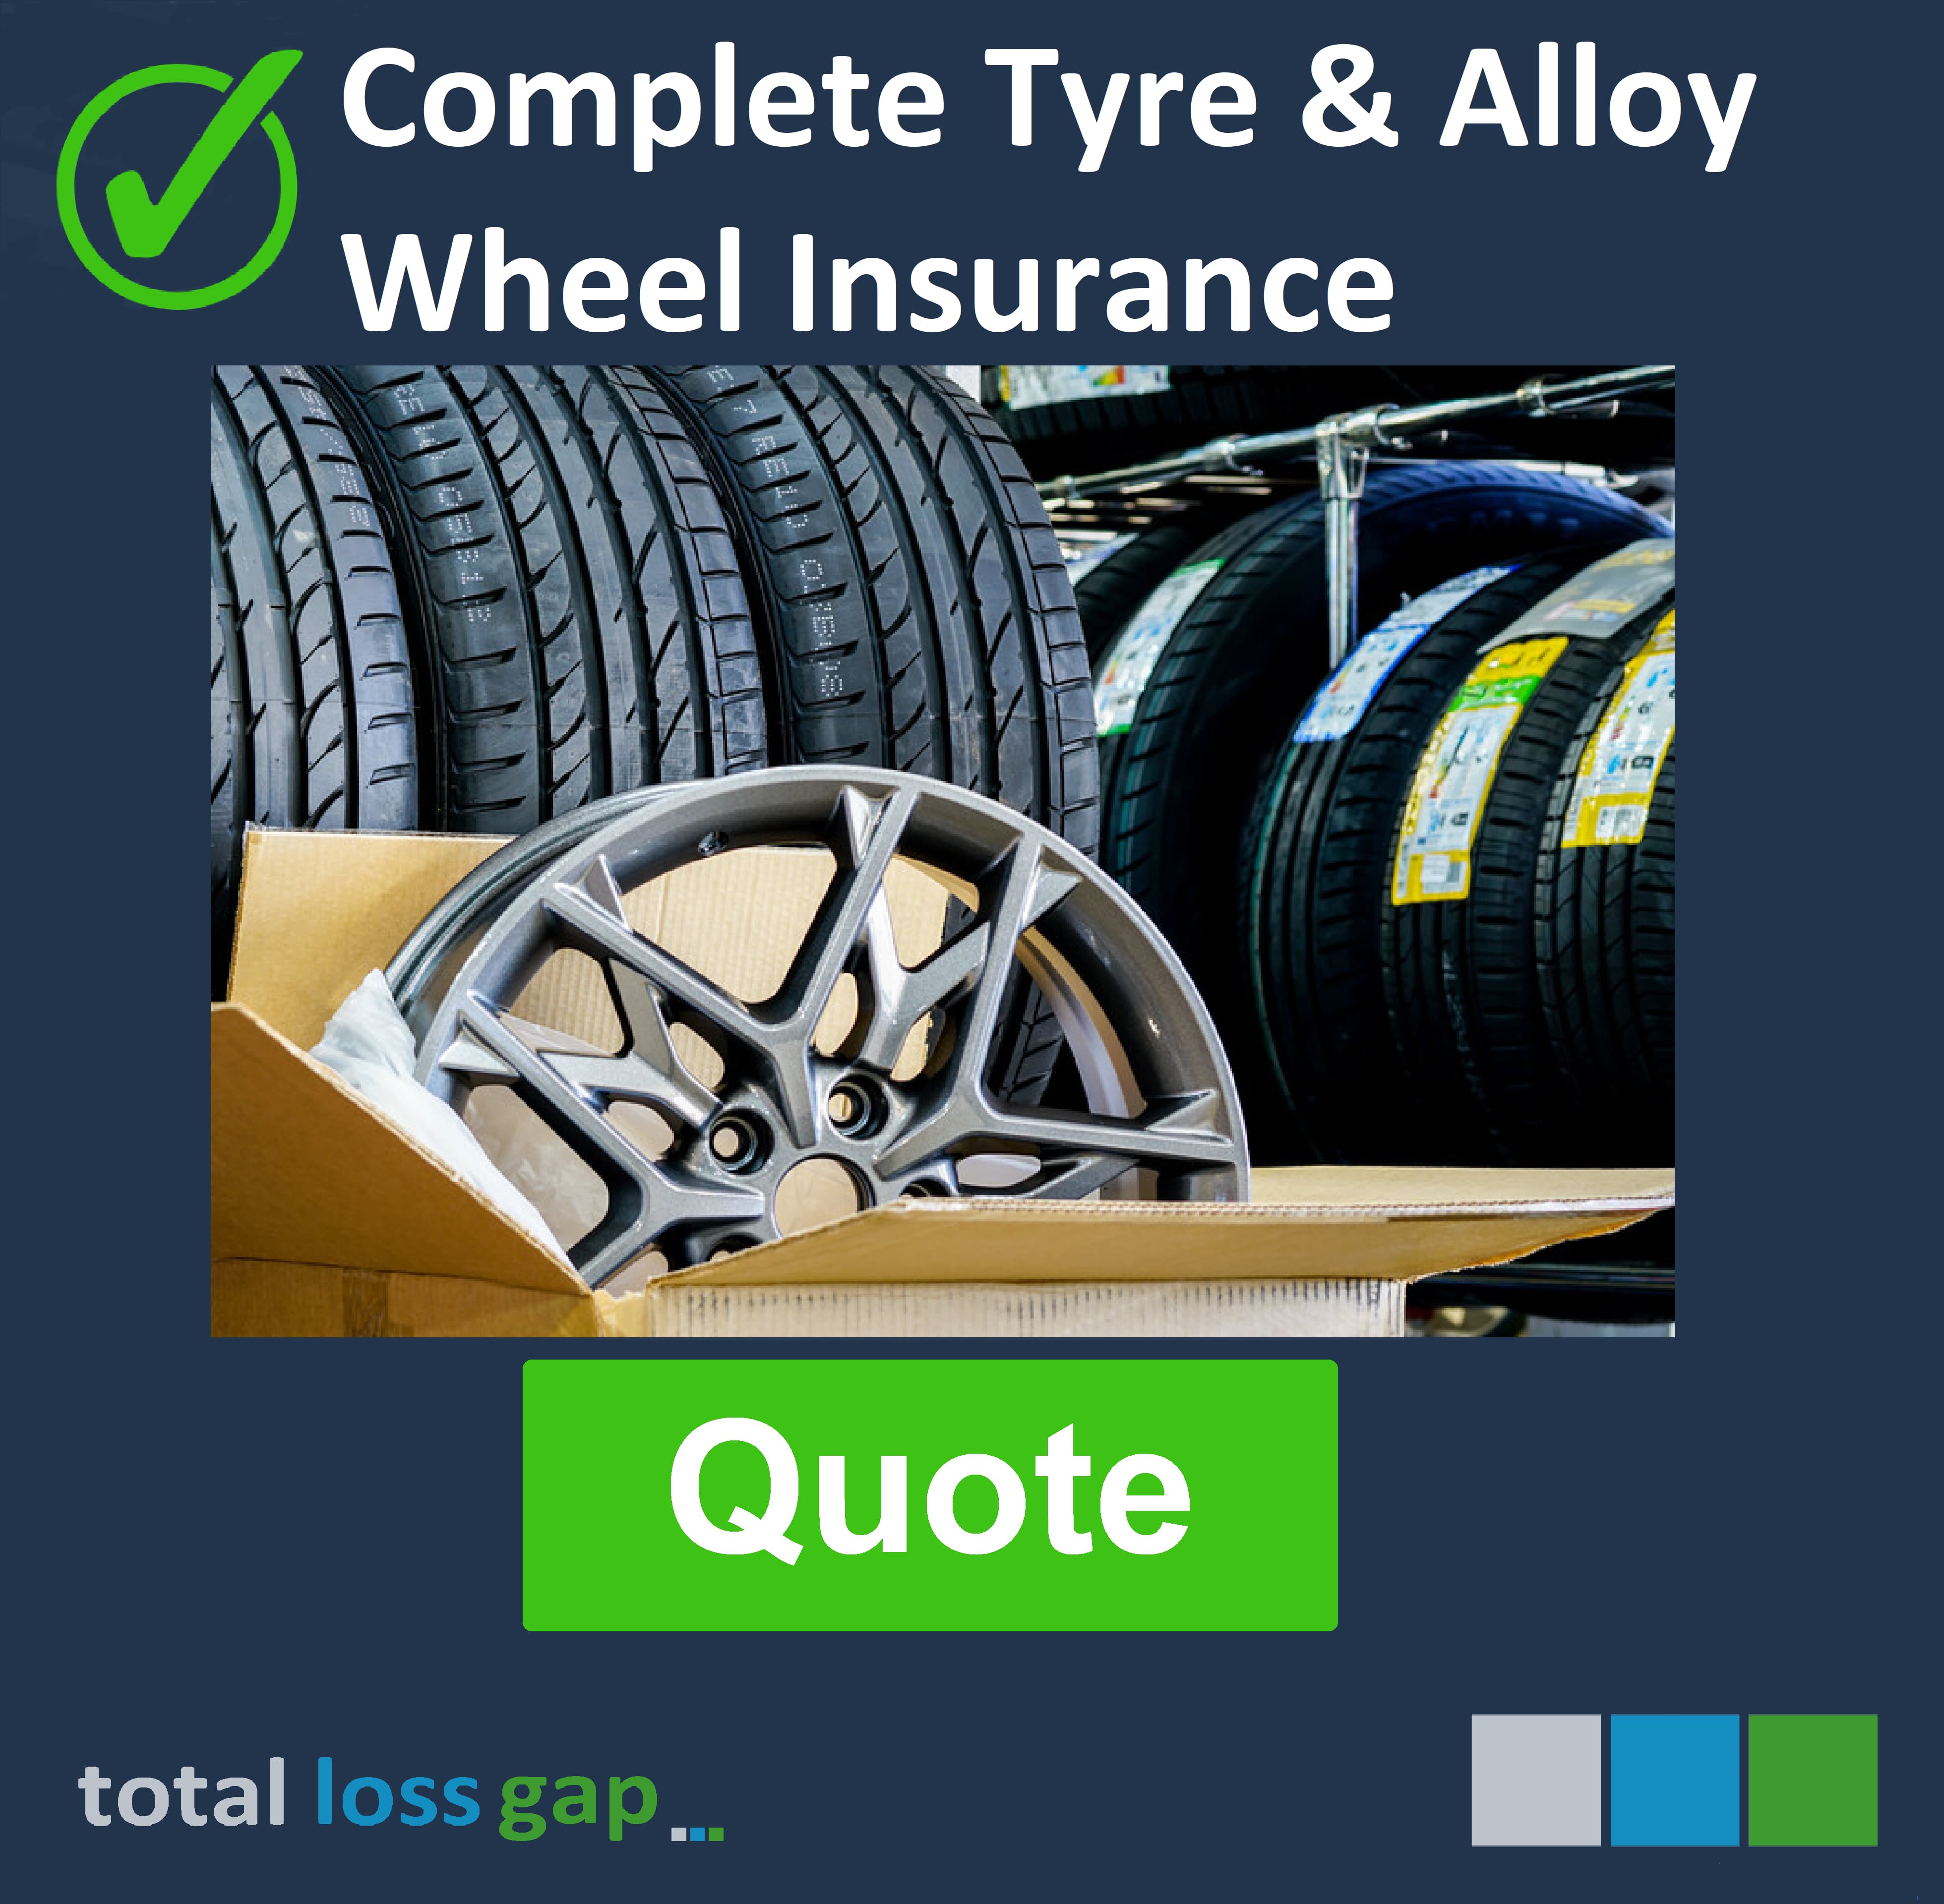 Tyre and Alloy Wheel insurance for your New Audi